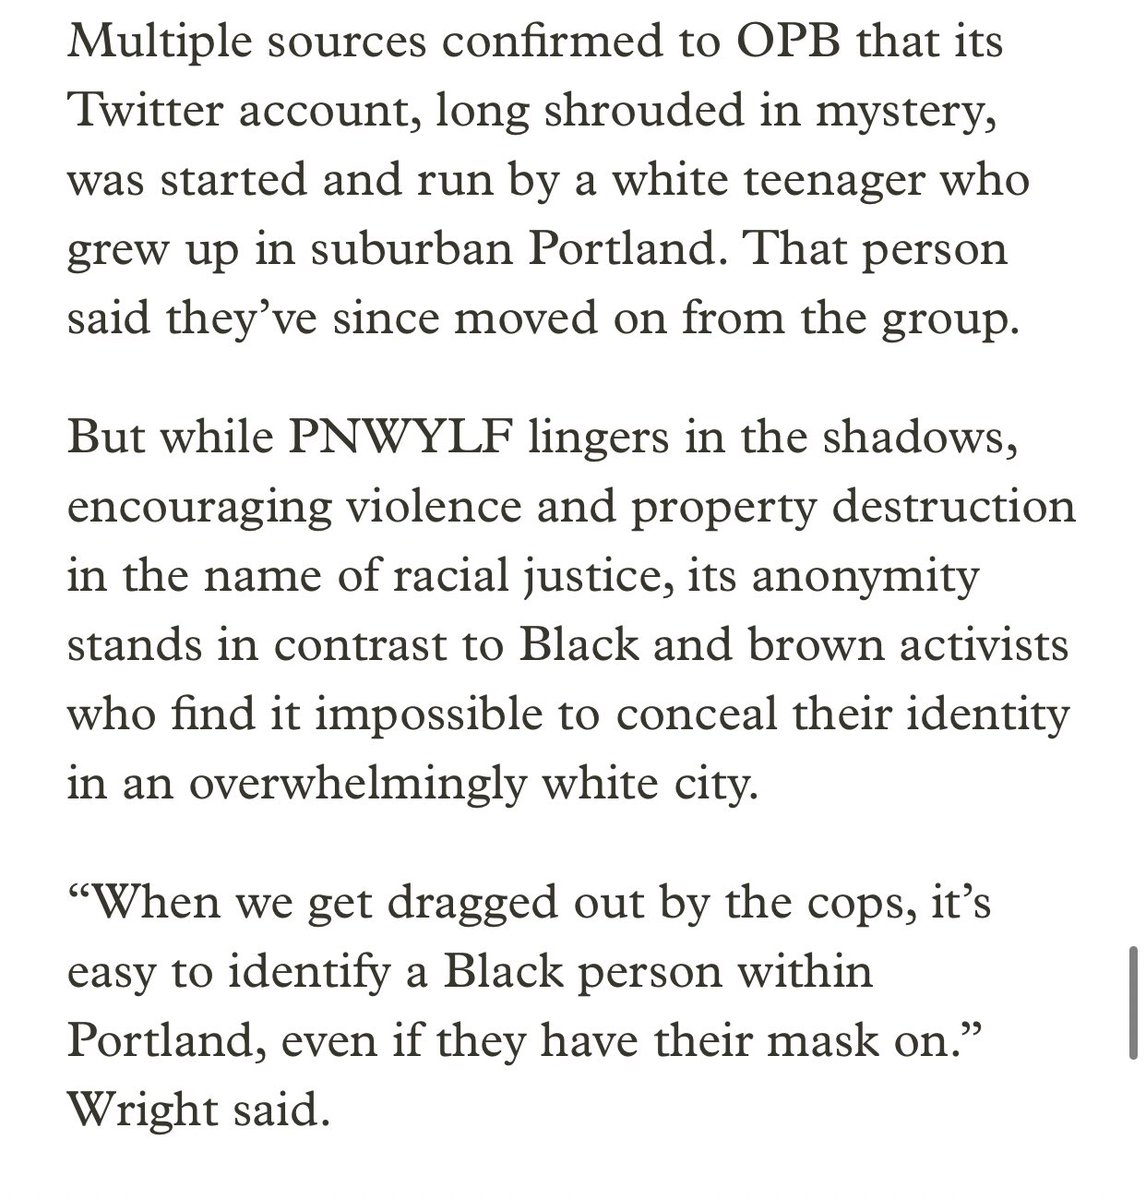 Social media accounts like PNWYLF encourage more aggressive tacticsbut their anonymity stands in contrast to Black and brown activists who find it impossible to conceal their identity in an overwhelmingly white cityPNWYLF was created by a white teenager from the suburbs